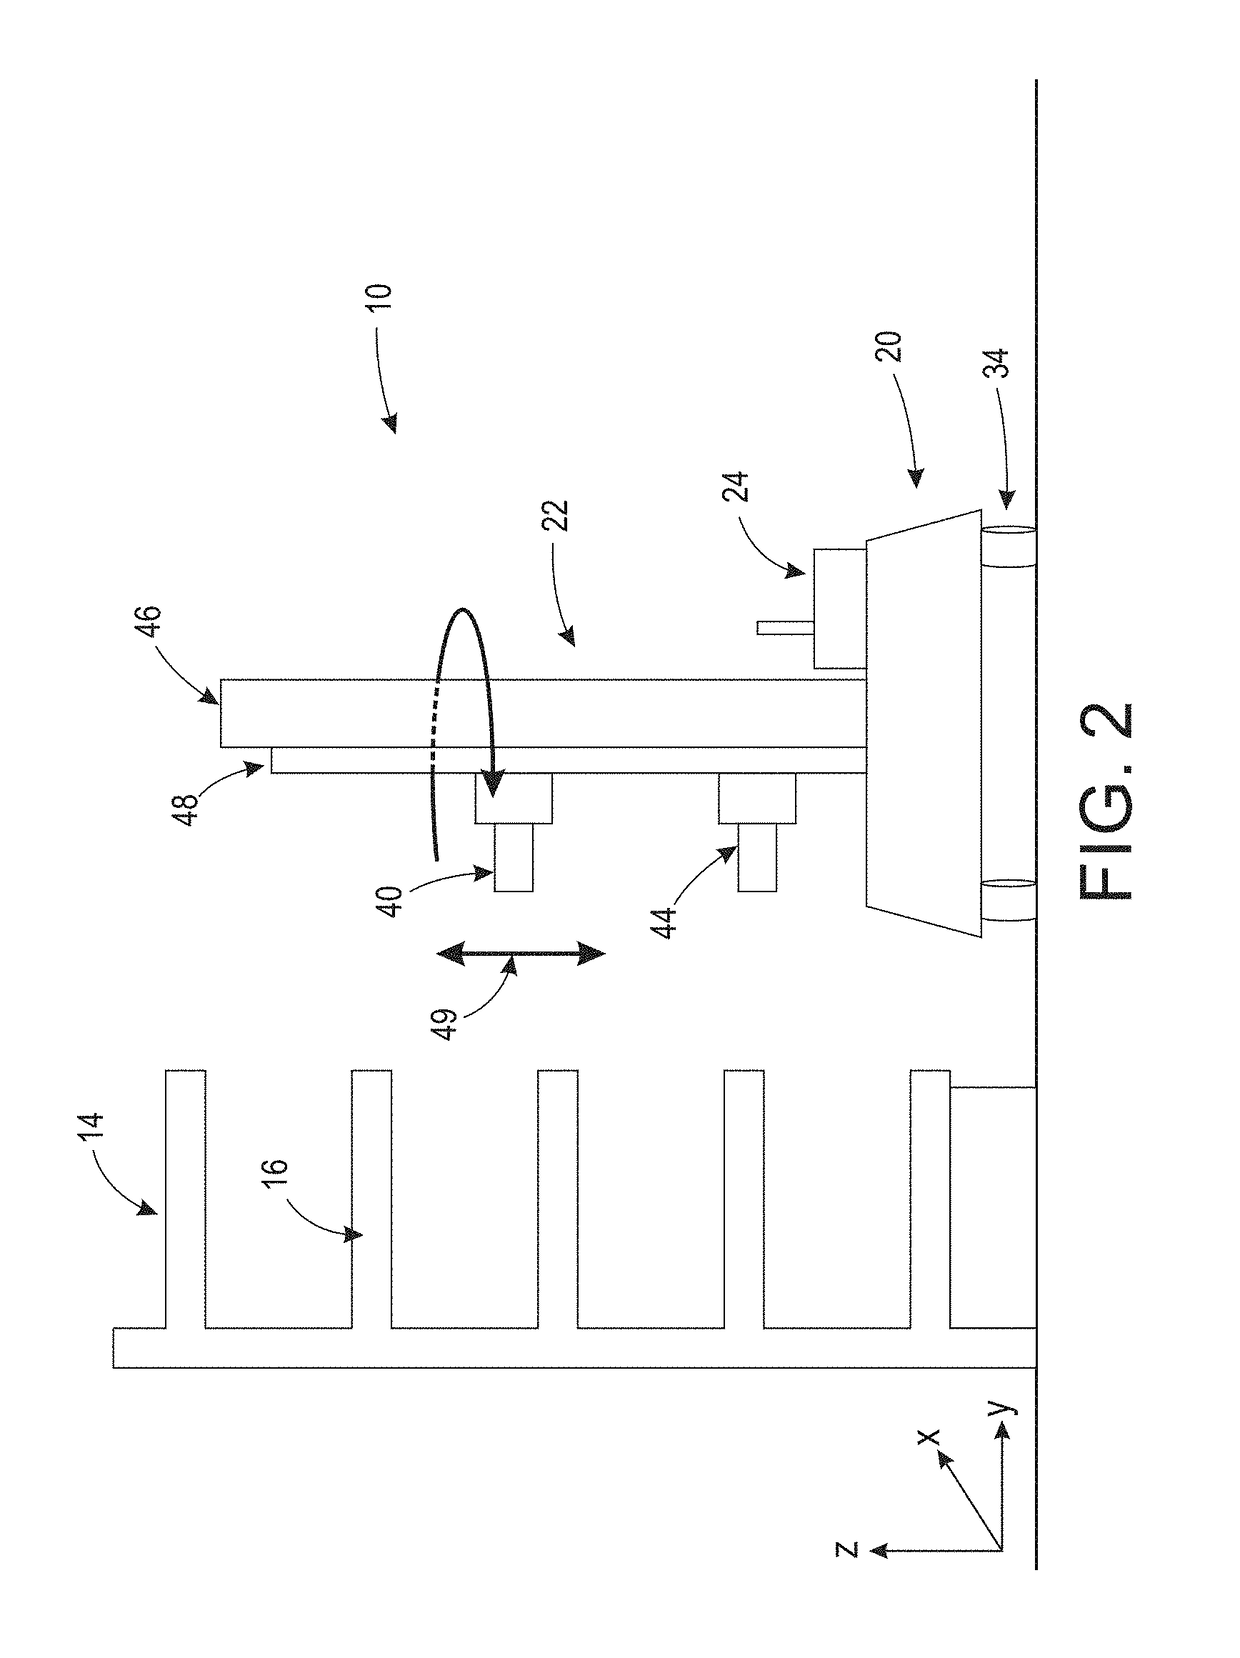 Store shelf imaging system and method